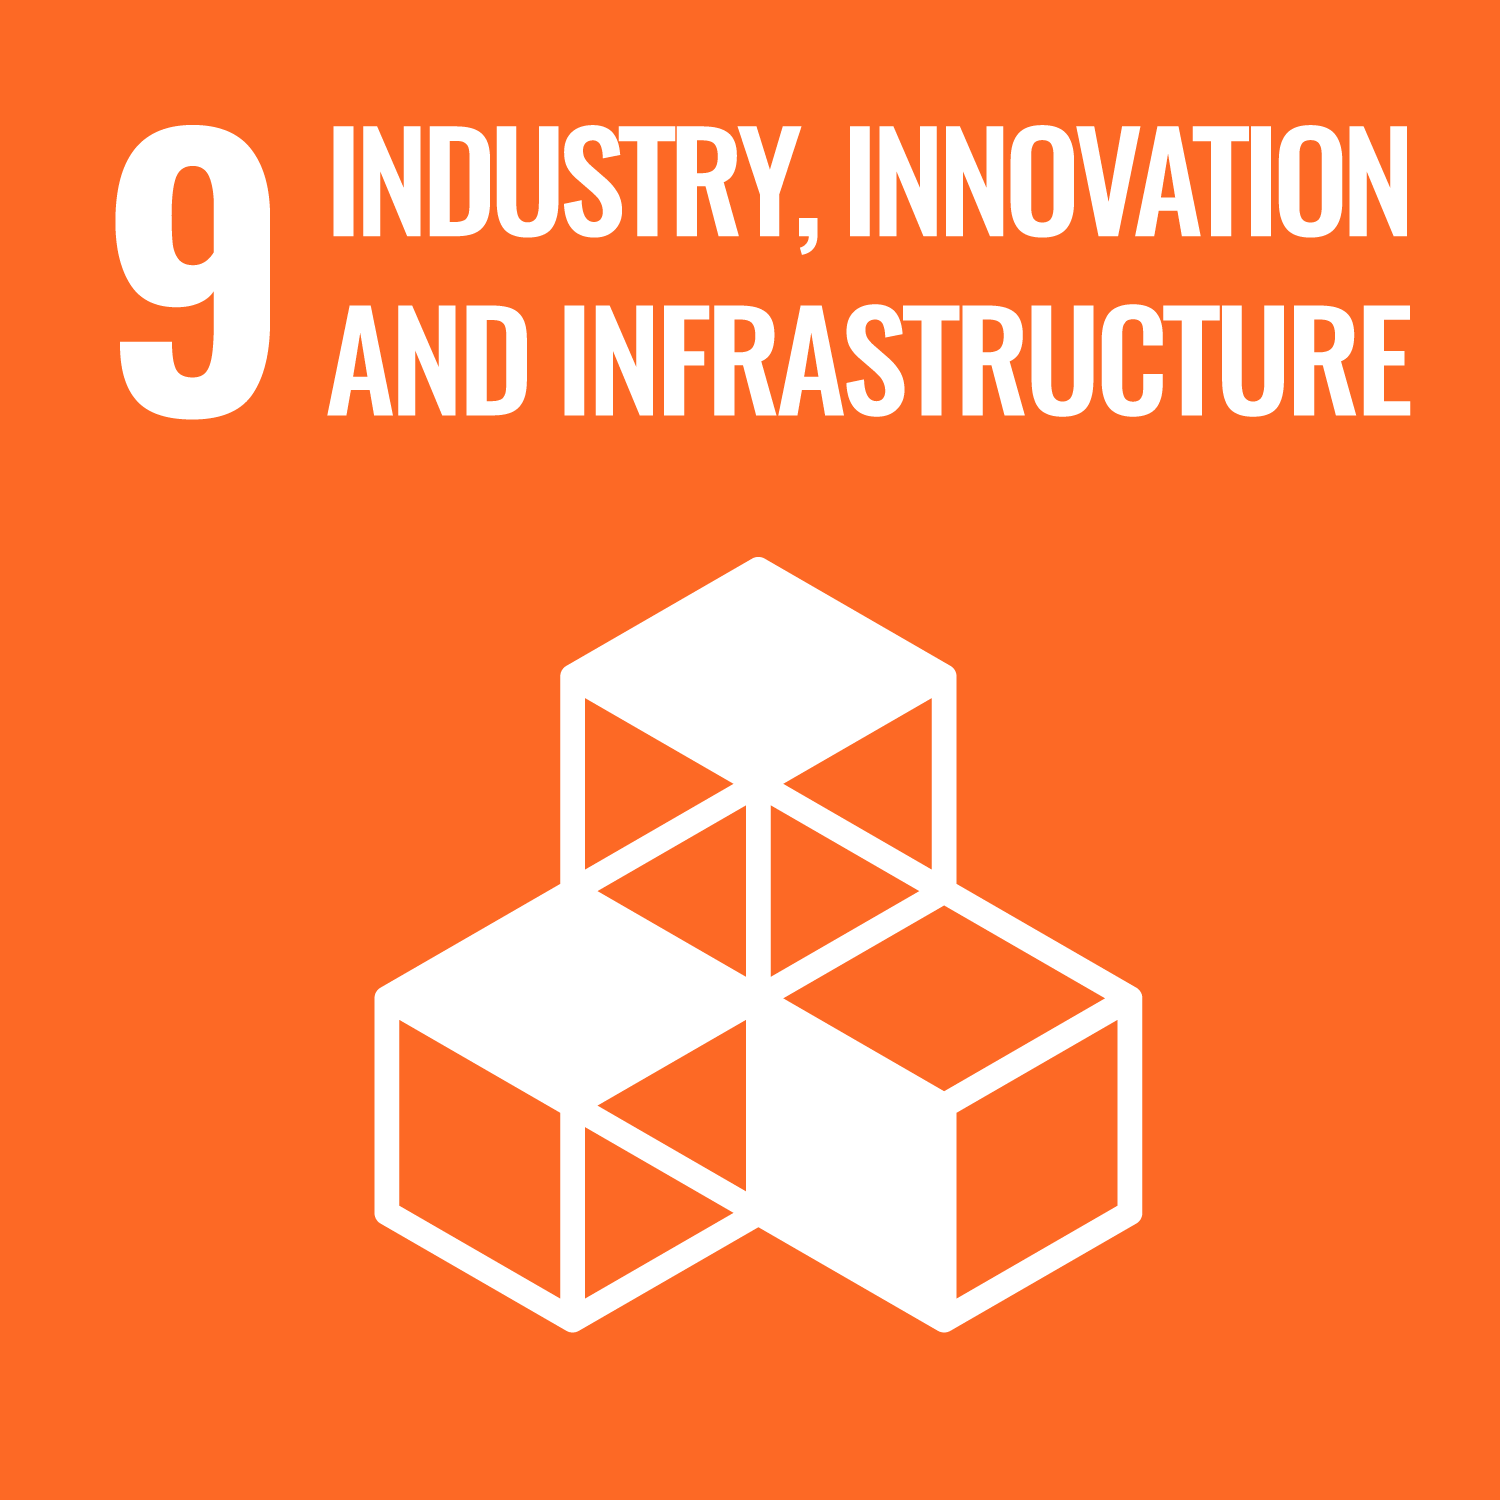 United Nations Sustainable Development Goal Number 9: Industry, Innovation and Infrastructure